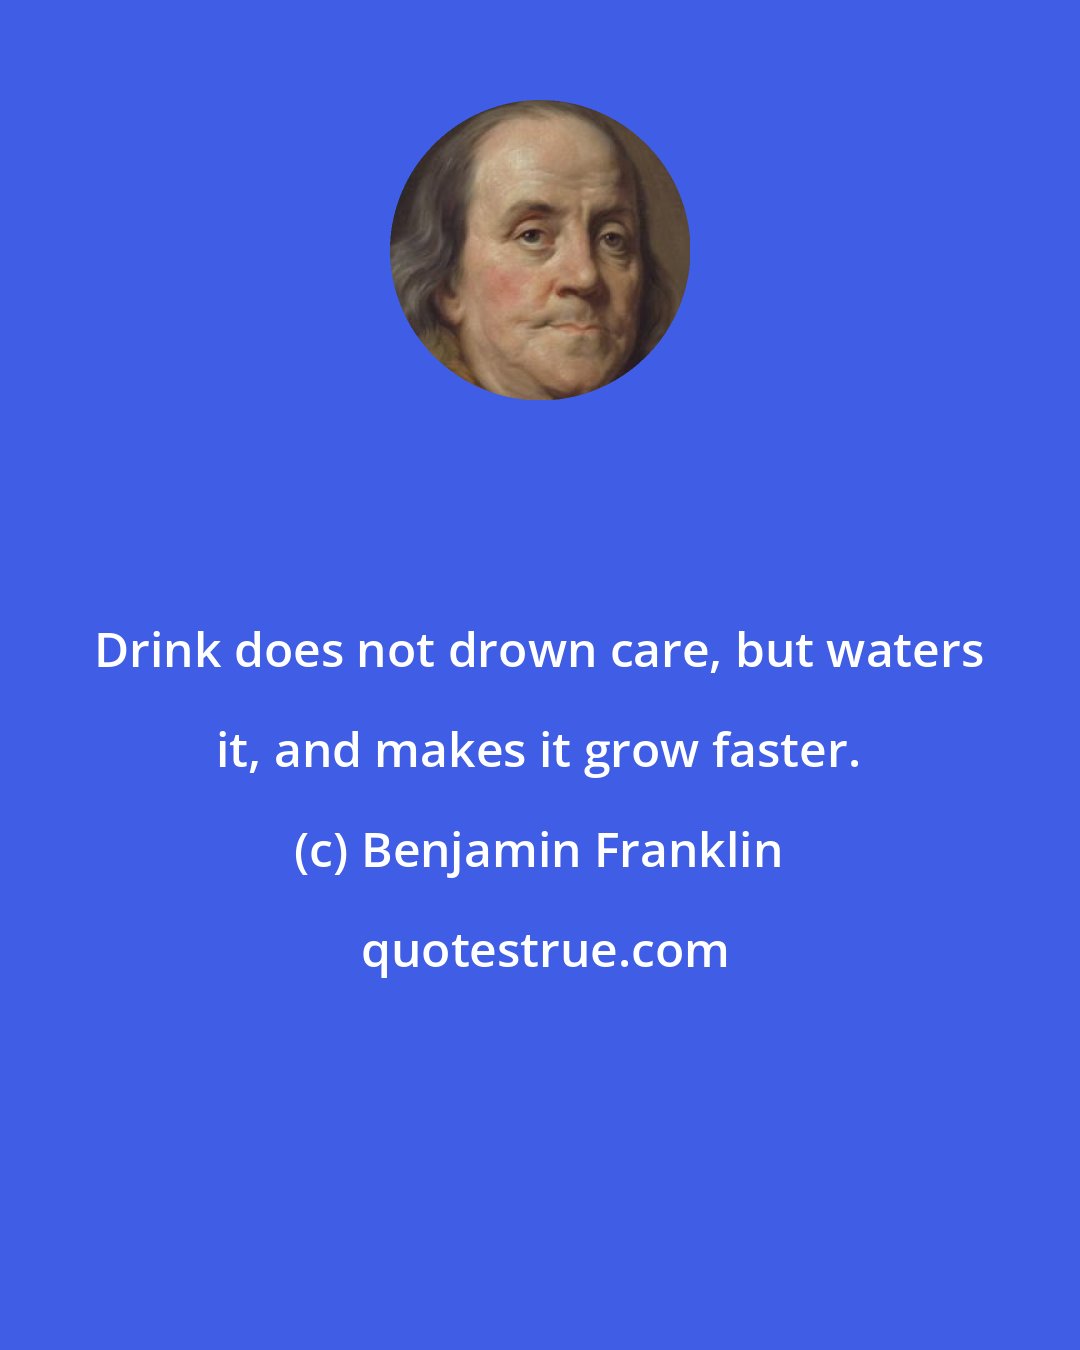 Benjamin Franklin: Drink does not drown care, but waters it, and makes it grow faster.